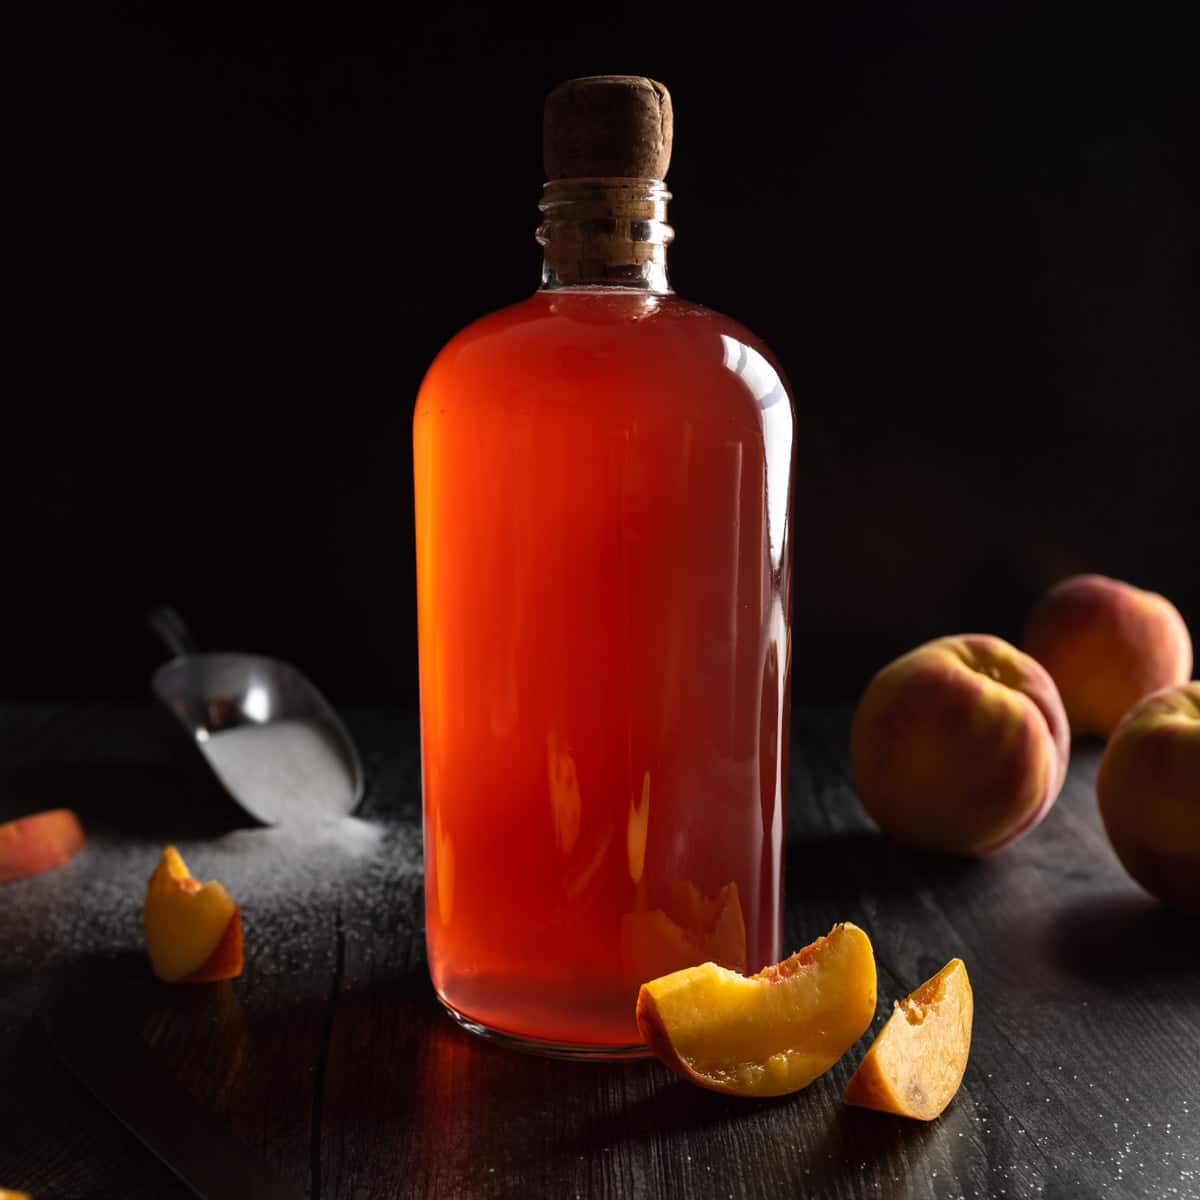 A corked glass bottle of peach syrup surrounded by whole and sliced peaches and a scoop or sugar